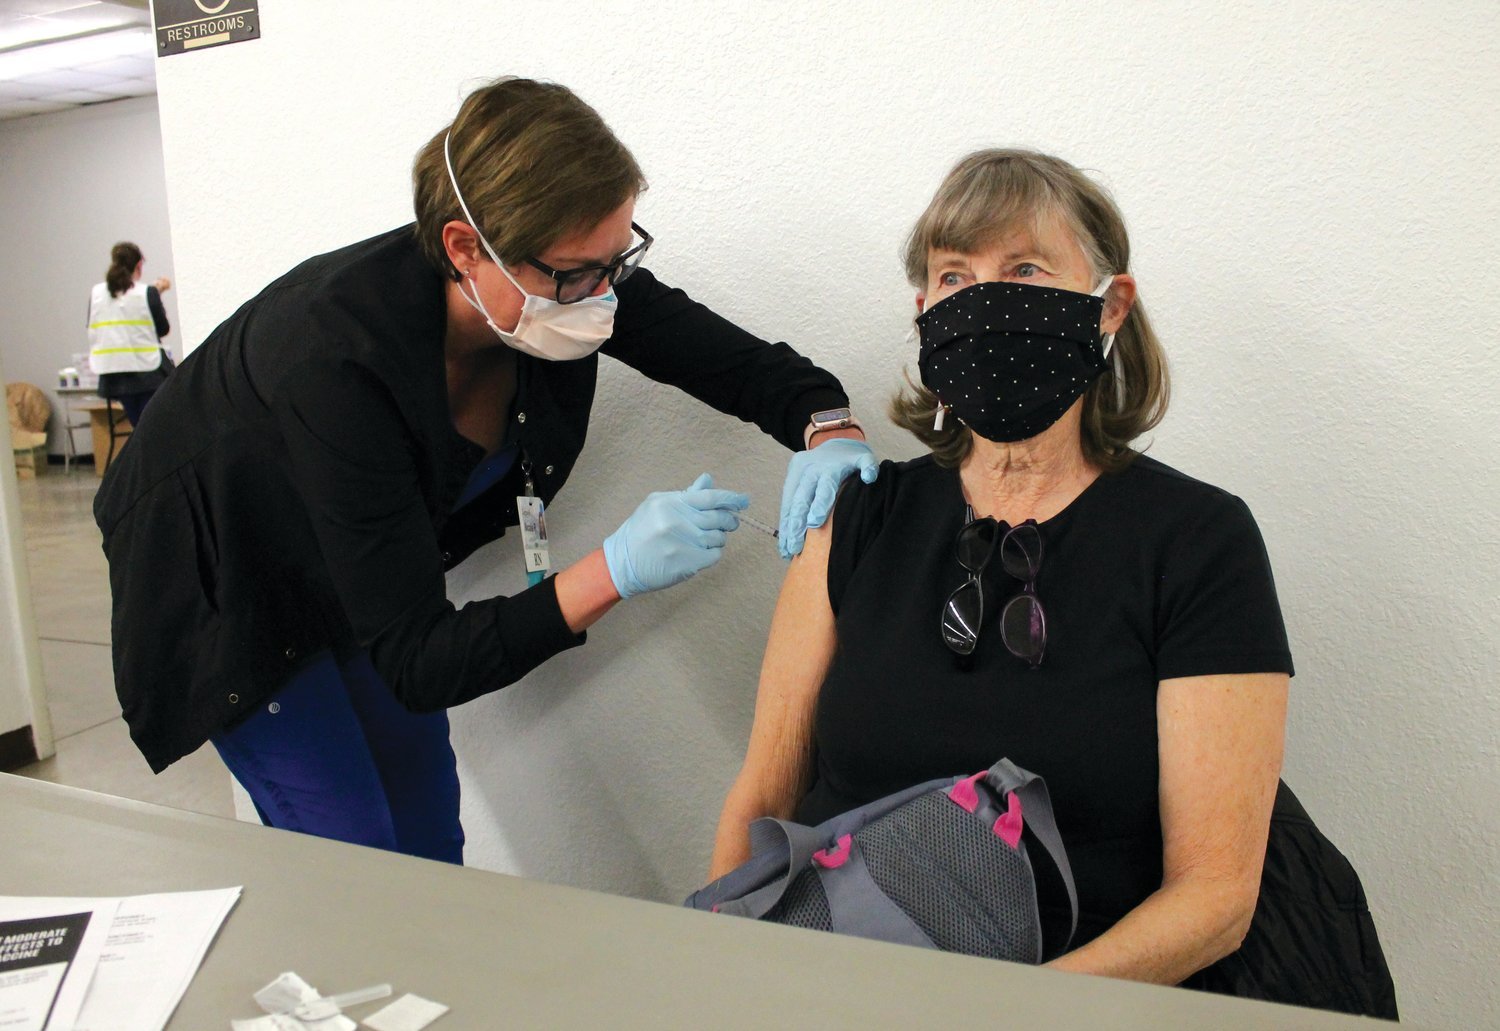 Nicole Porter, RN, of Bothwell Regional Health Center, administers a COVID-19 vaccine to Sandy Fracchia, of Sedalia, on Jan. 28 at the MO-AG Theatre on the Missouri State Fairgrounds during a mass vaccination event. “I get the flu shot every year and I figured I’d get this too,” Fracchia said. “I have people to see and a life to live again.”